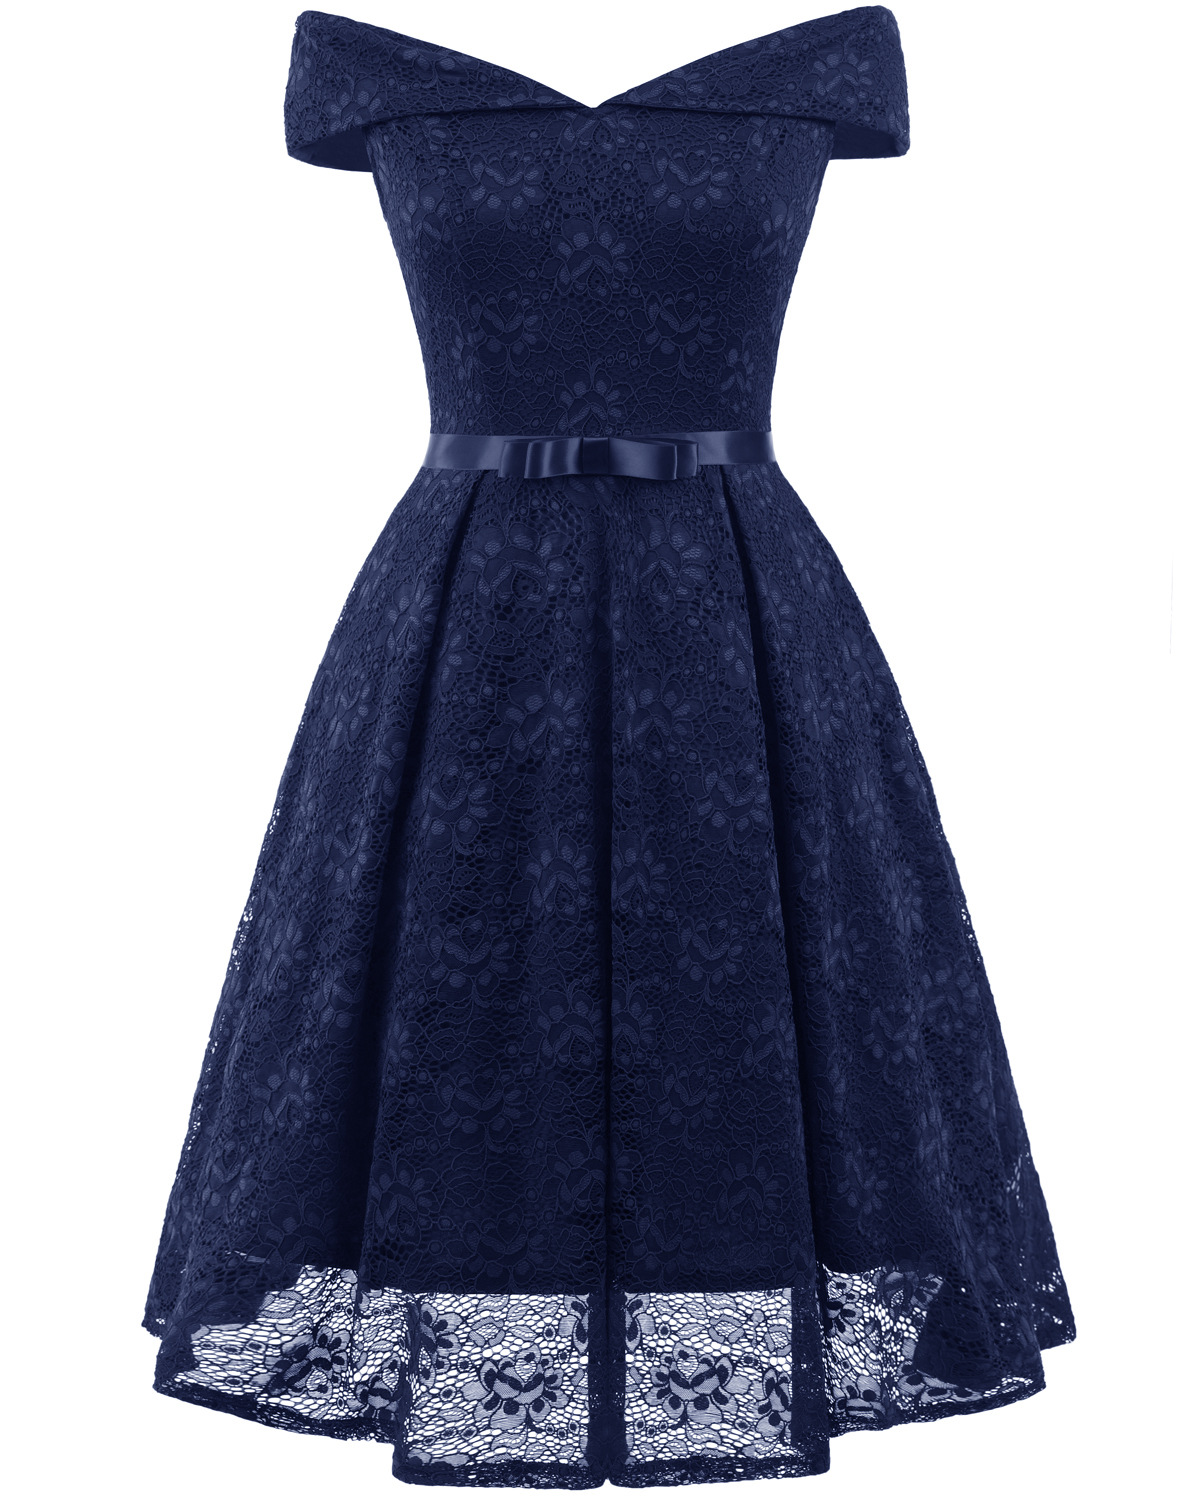 Fashion Navy Blue Lace Dress A Line Women Bridesmaid Party Gowns Soft ...